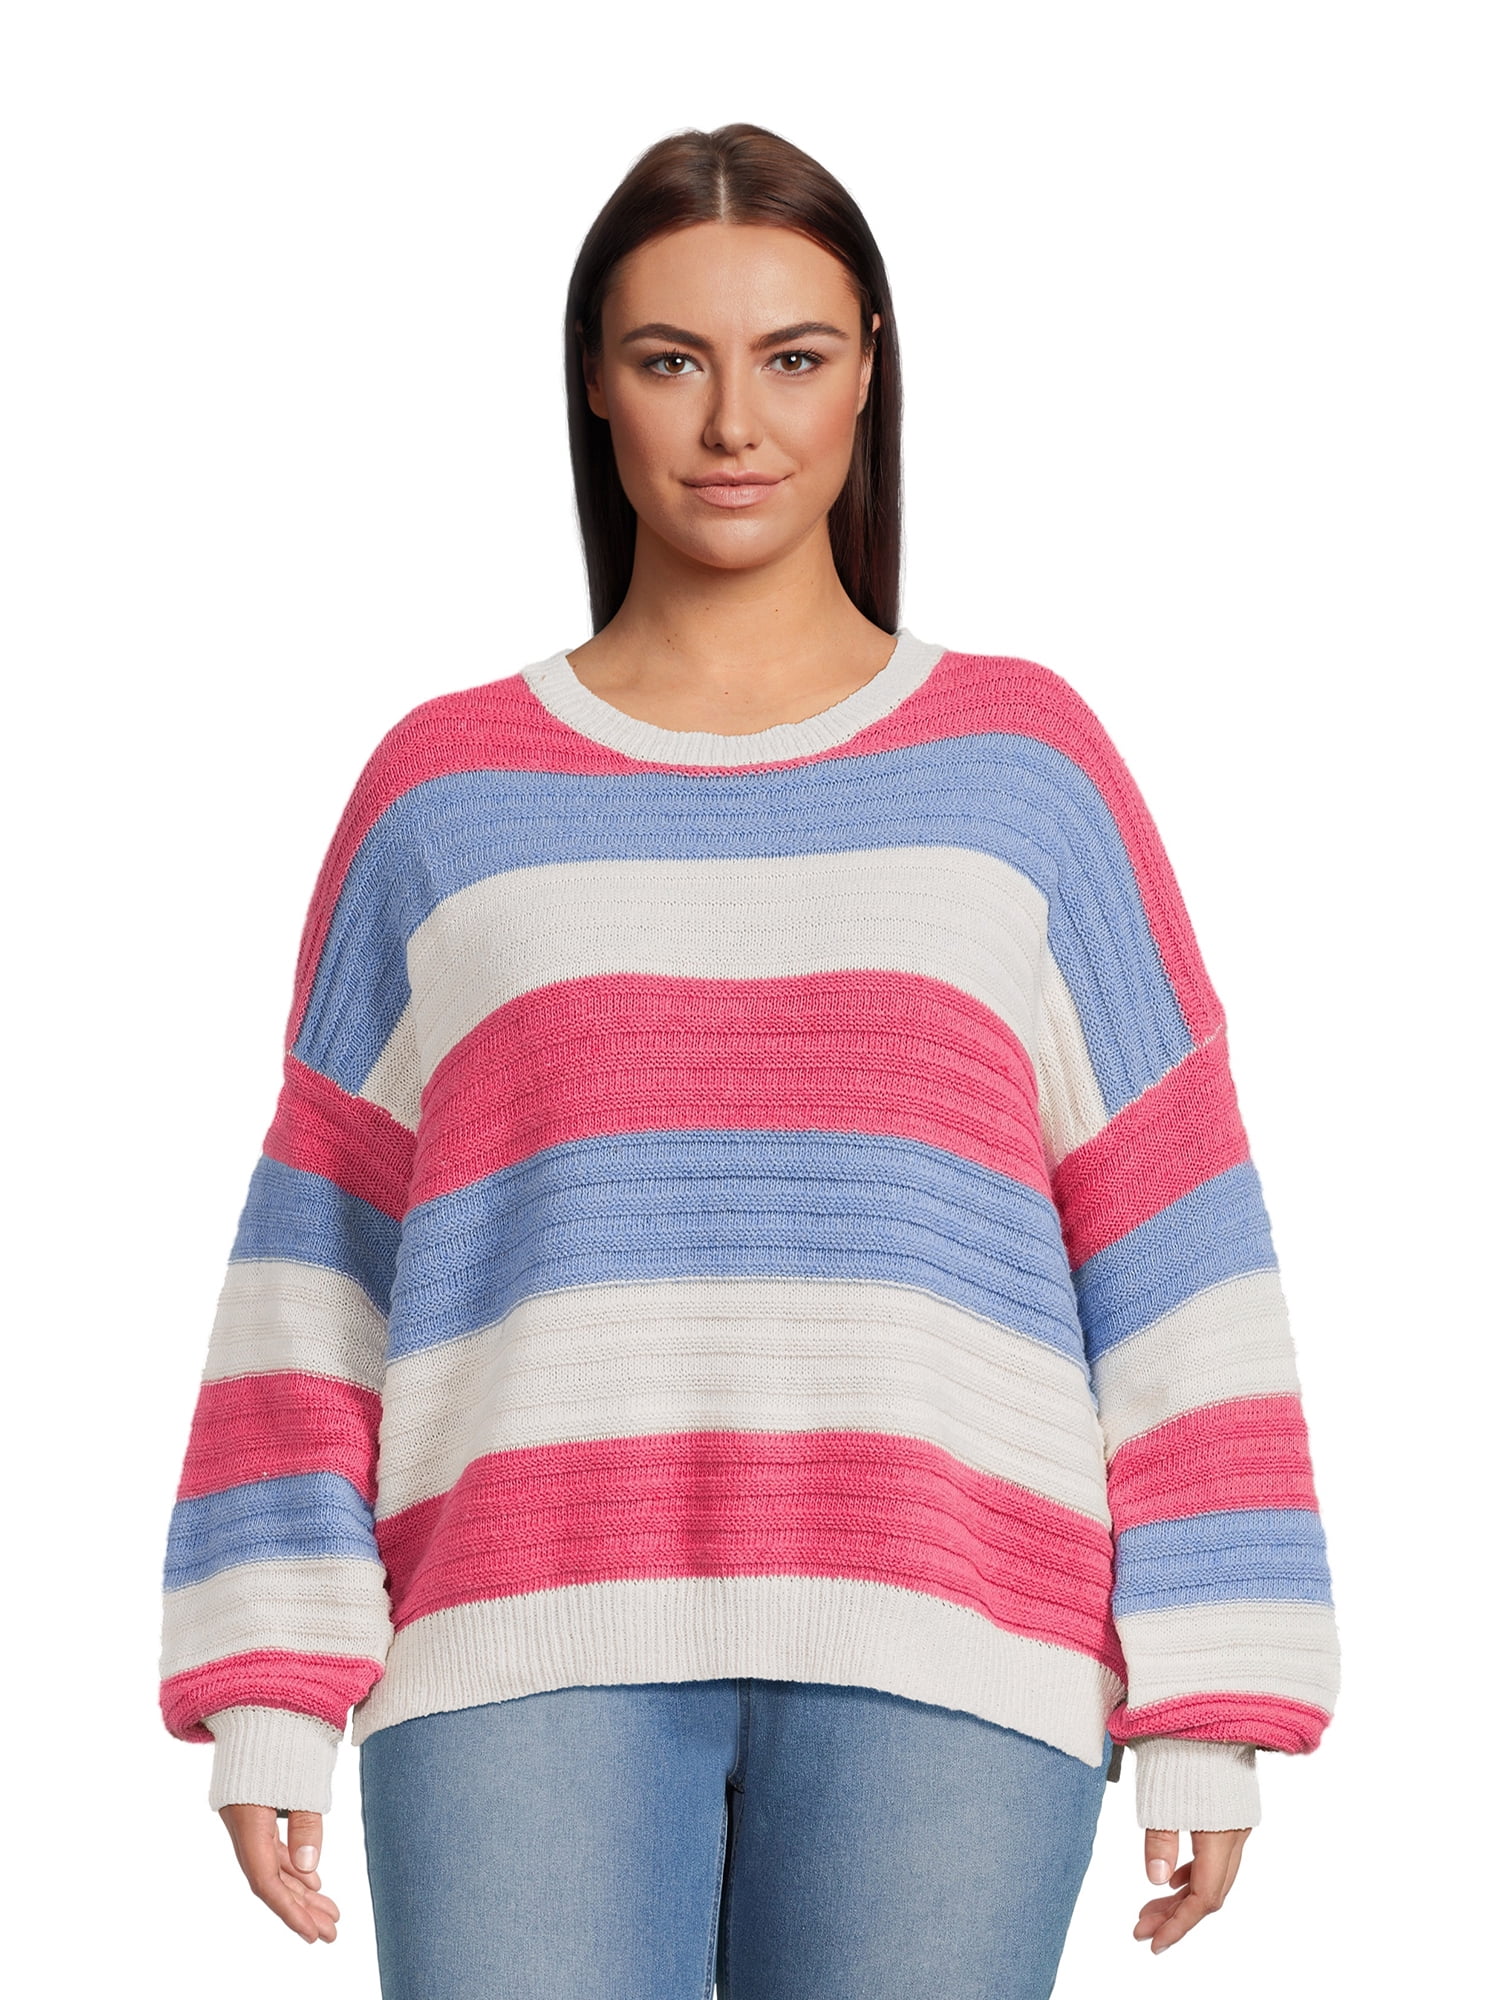 Dreamers by Debut Women's Plus Size Striped Pullover Sweater, Midweight ...